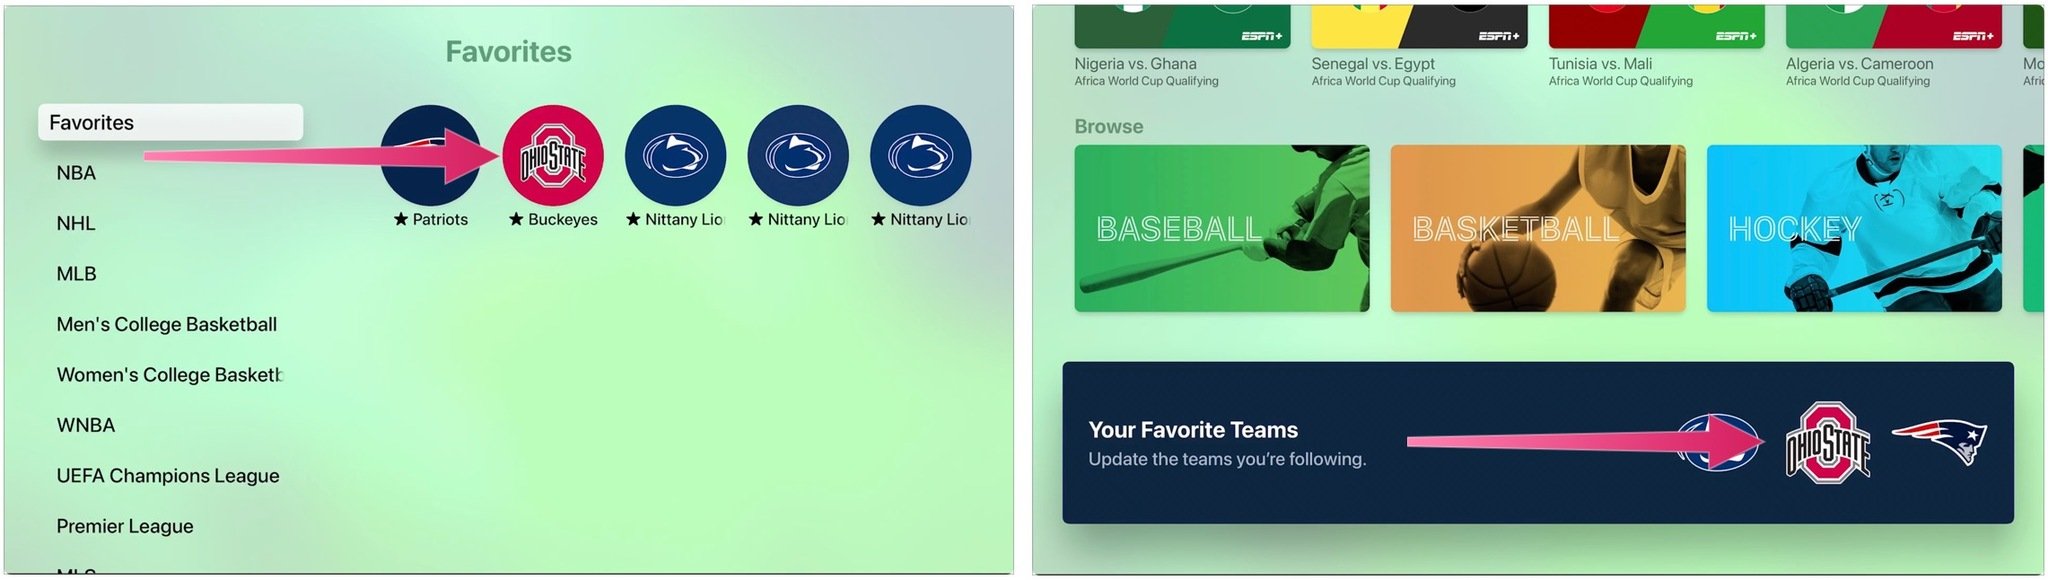 To set up the TV app for your favorite teams, view your favorite teams under the Your Favorite Teams section under the Sports tab.